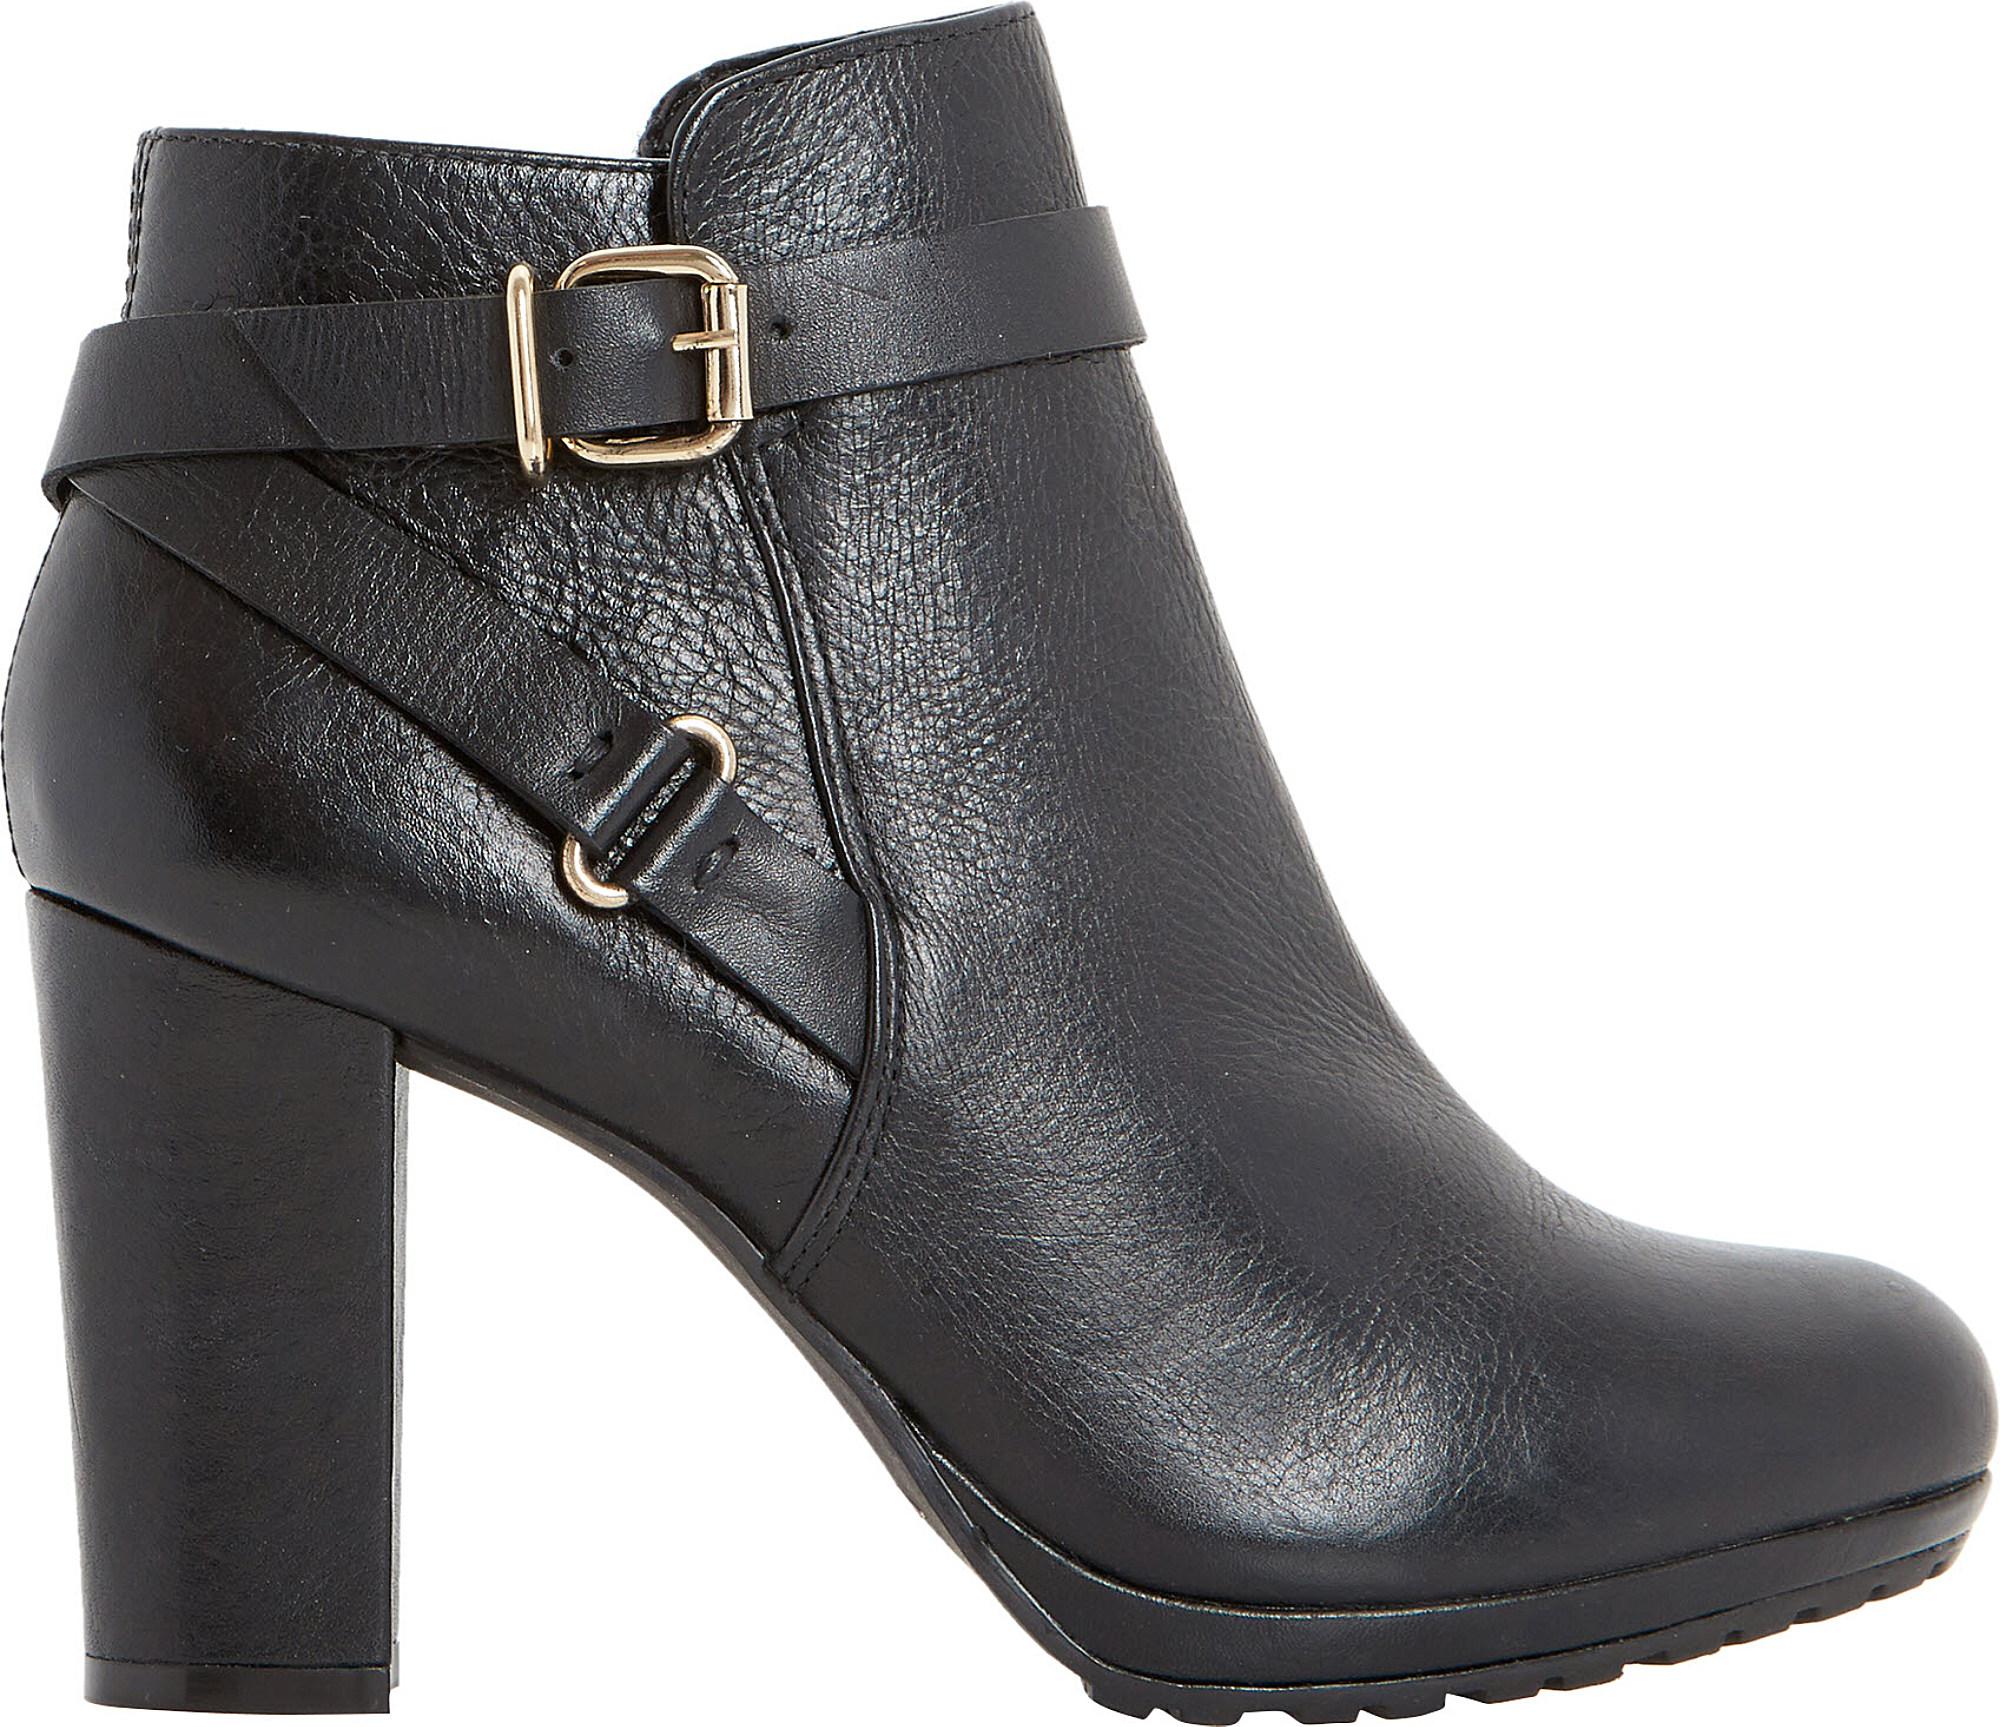 Lyst - Dune Puggy Leather Ankle Boots in Black